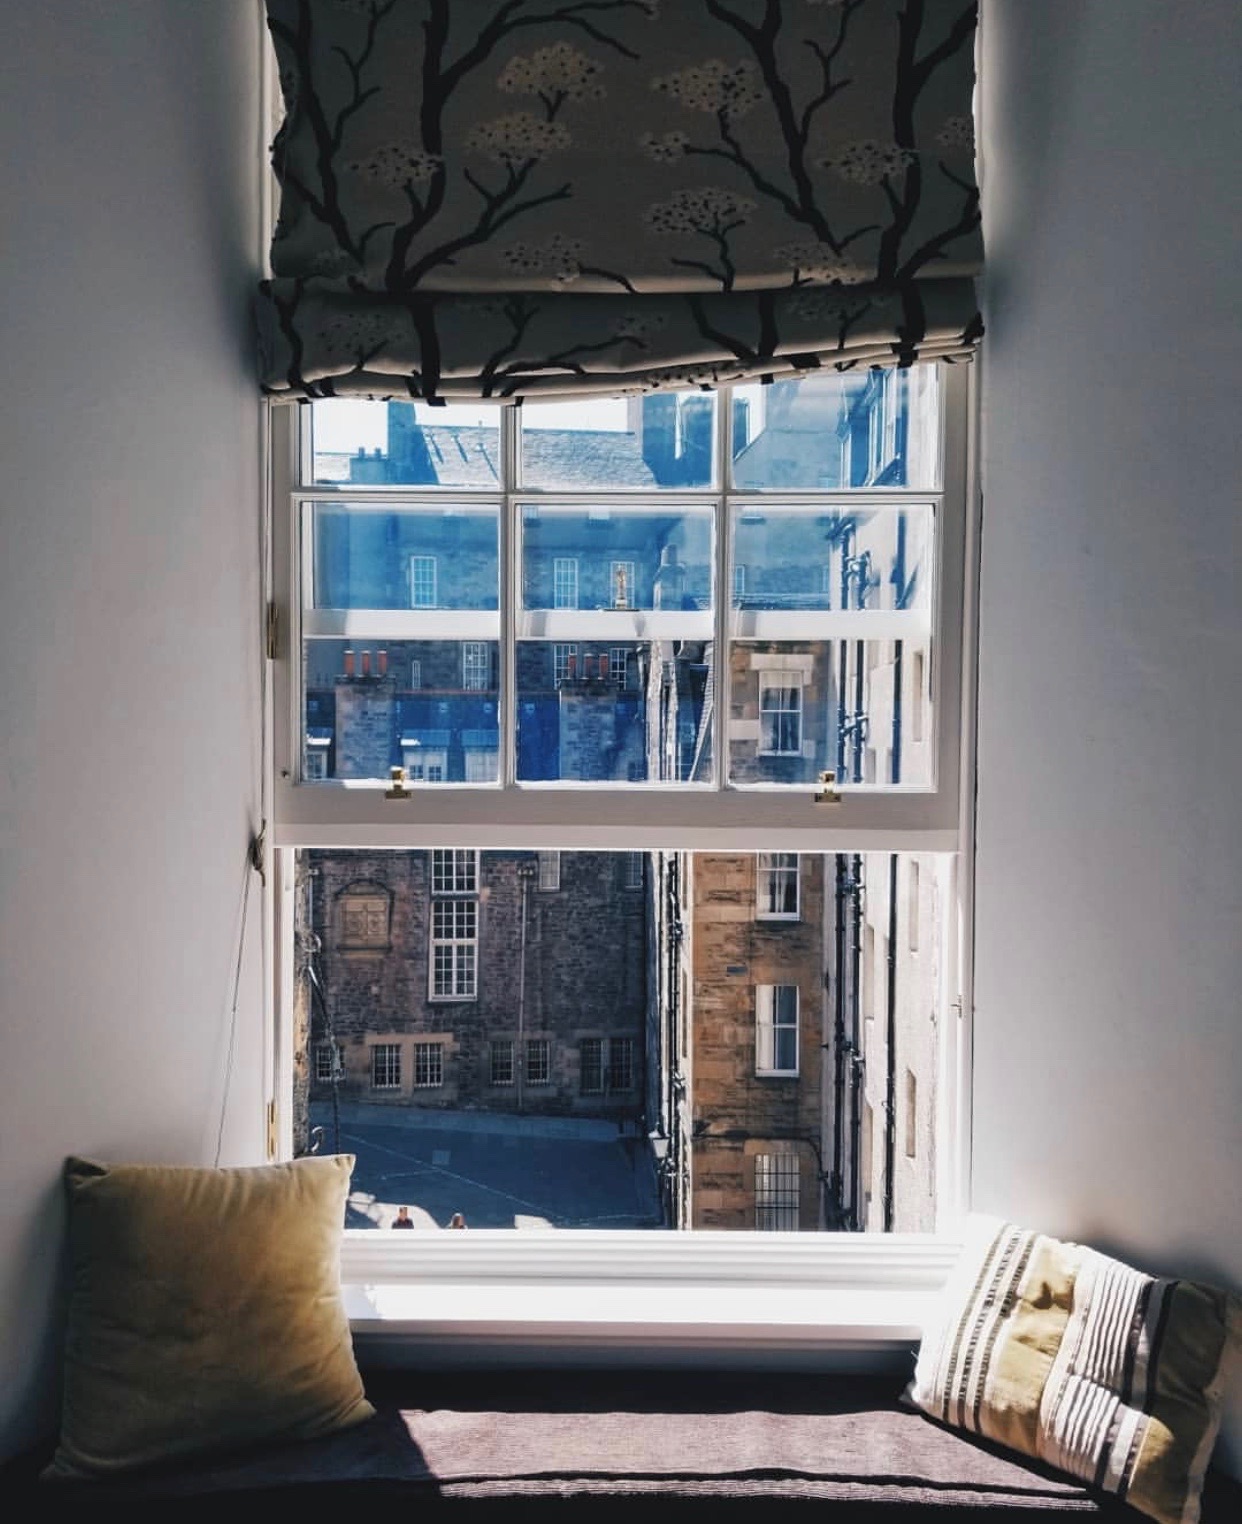 An open window in an Edinburgh flat on a sunny day, with a view into the courtyard and stone buildings across the way.